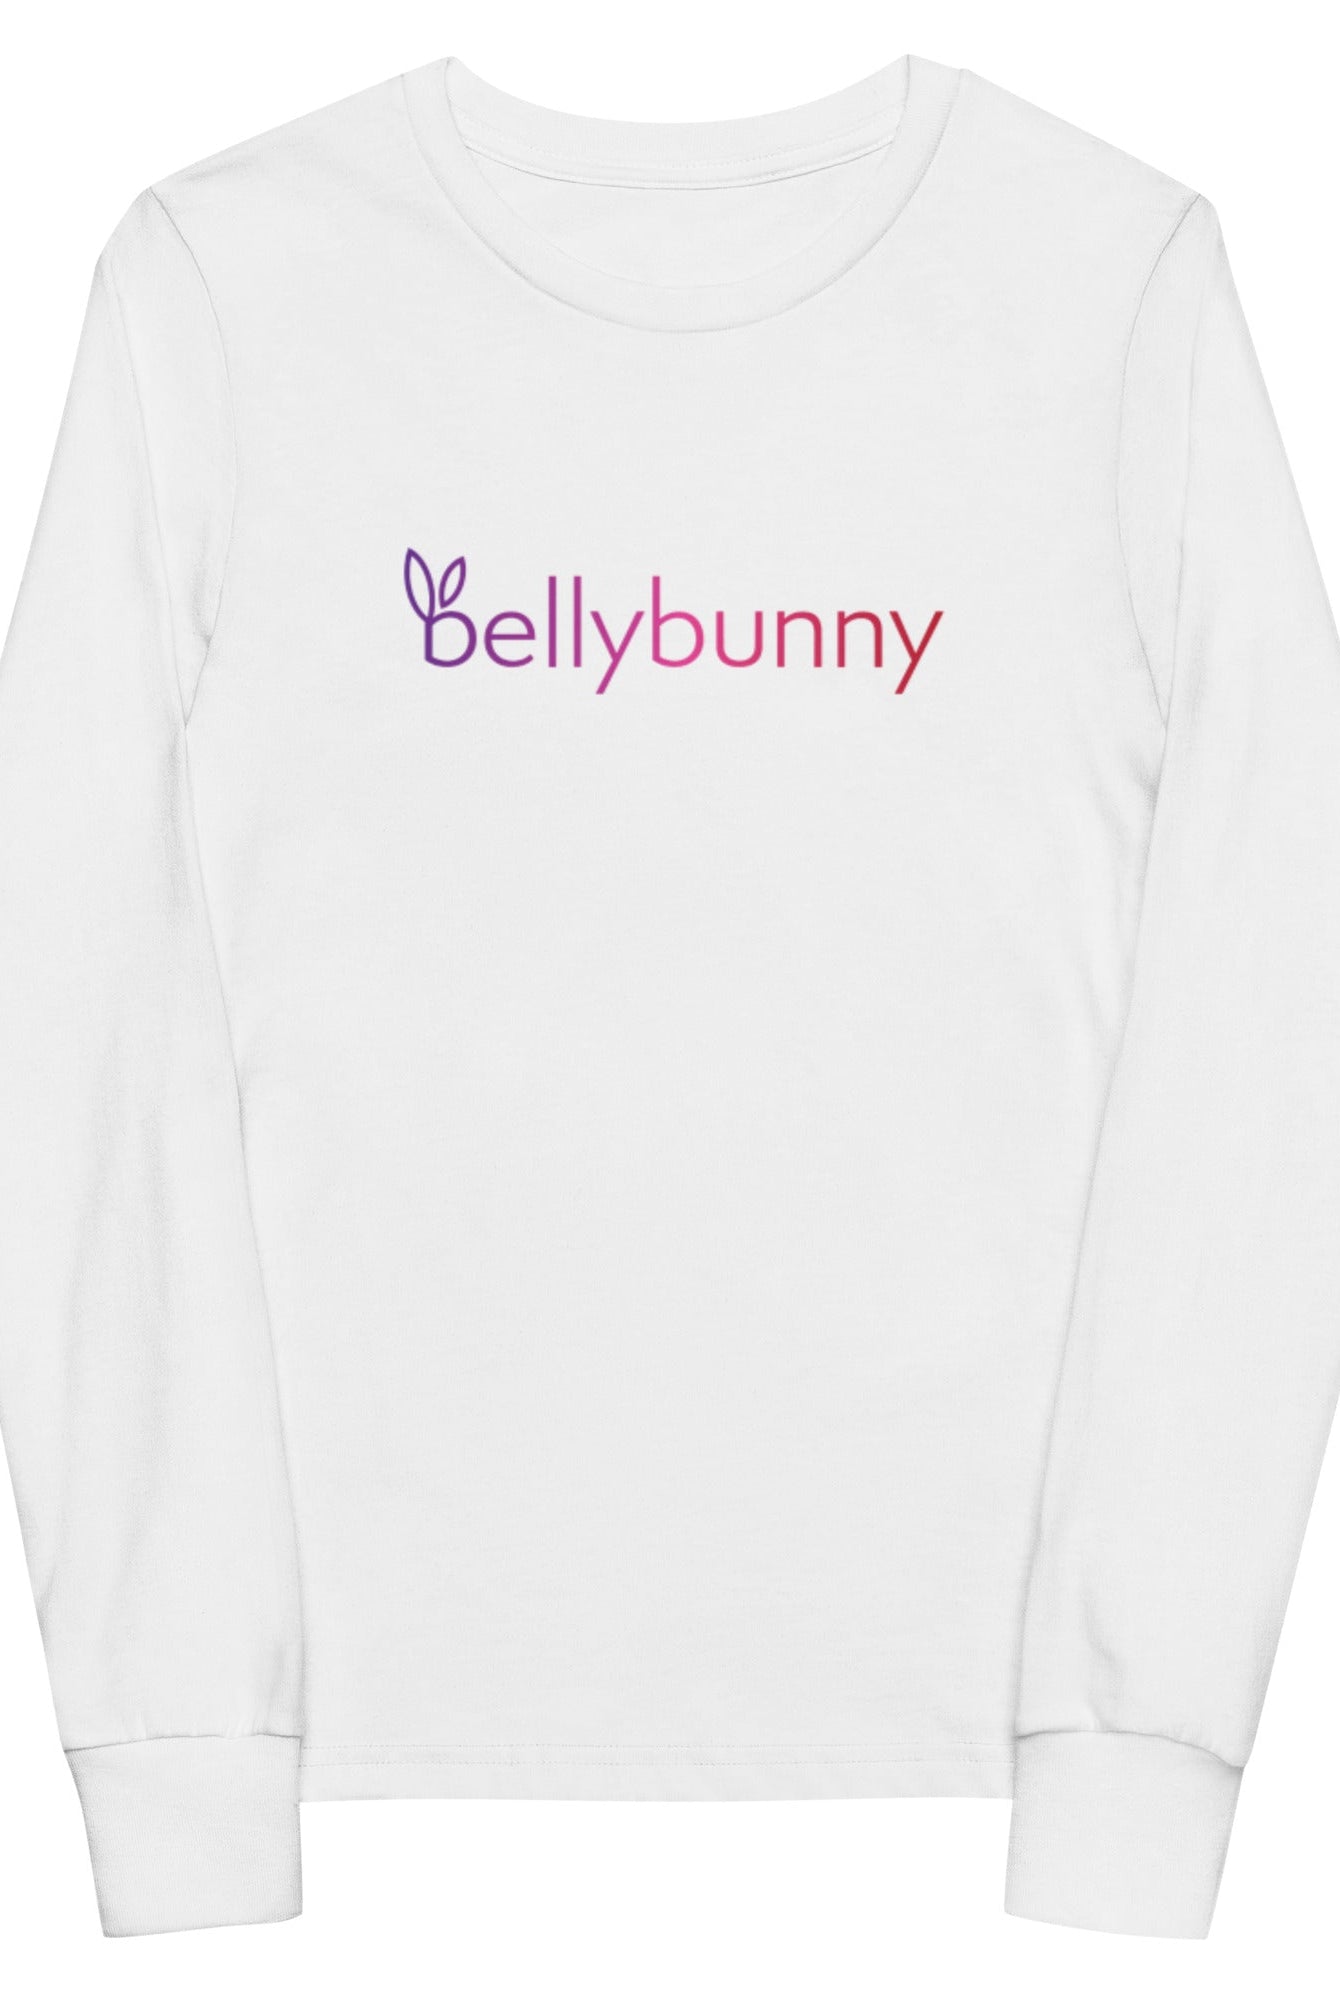 Bellybunny-Youth Long Sleeve T-Shirt-White-with rainbow logo